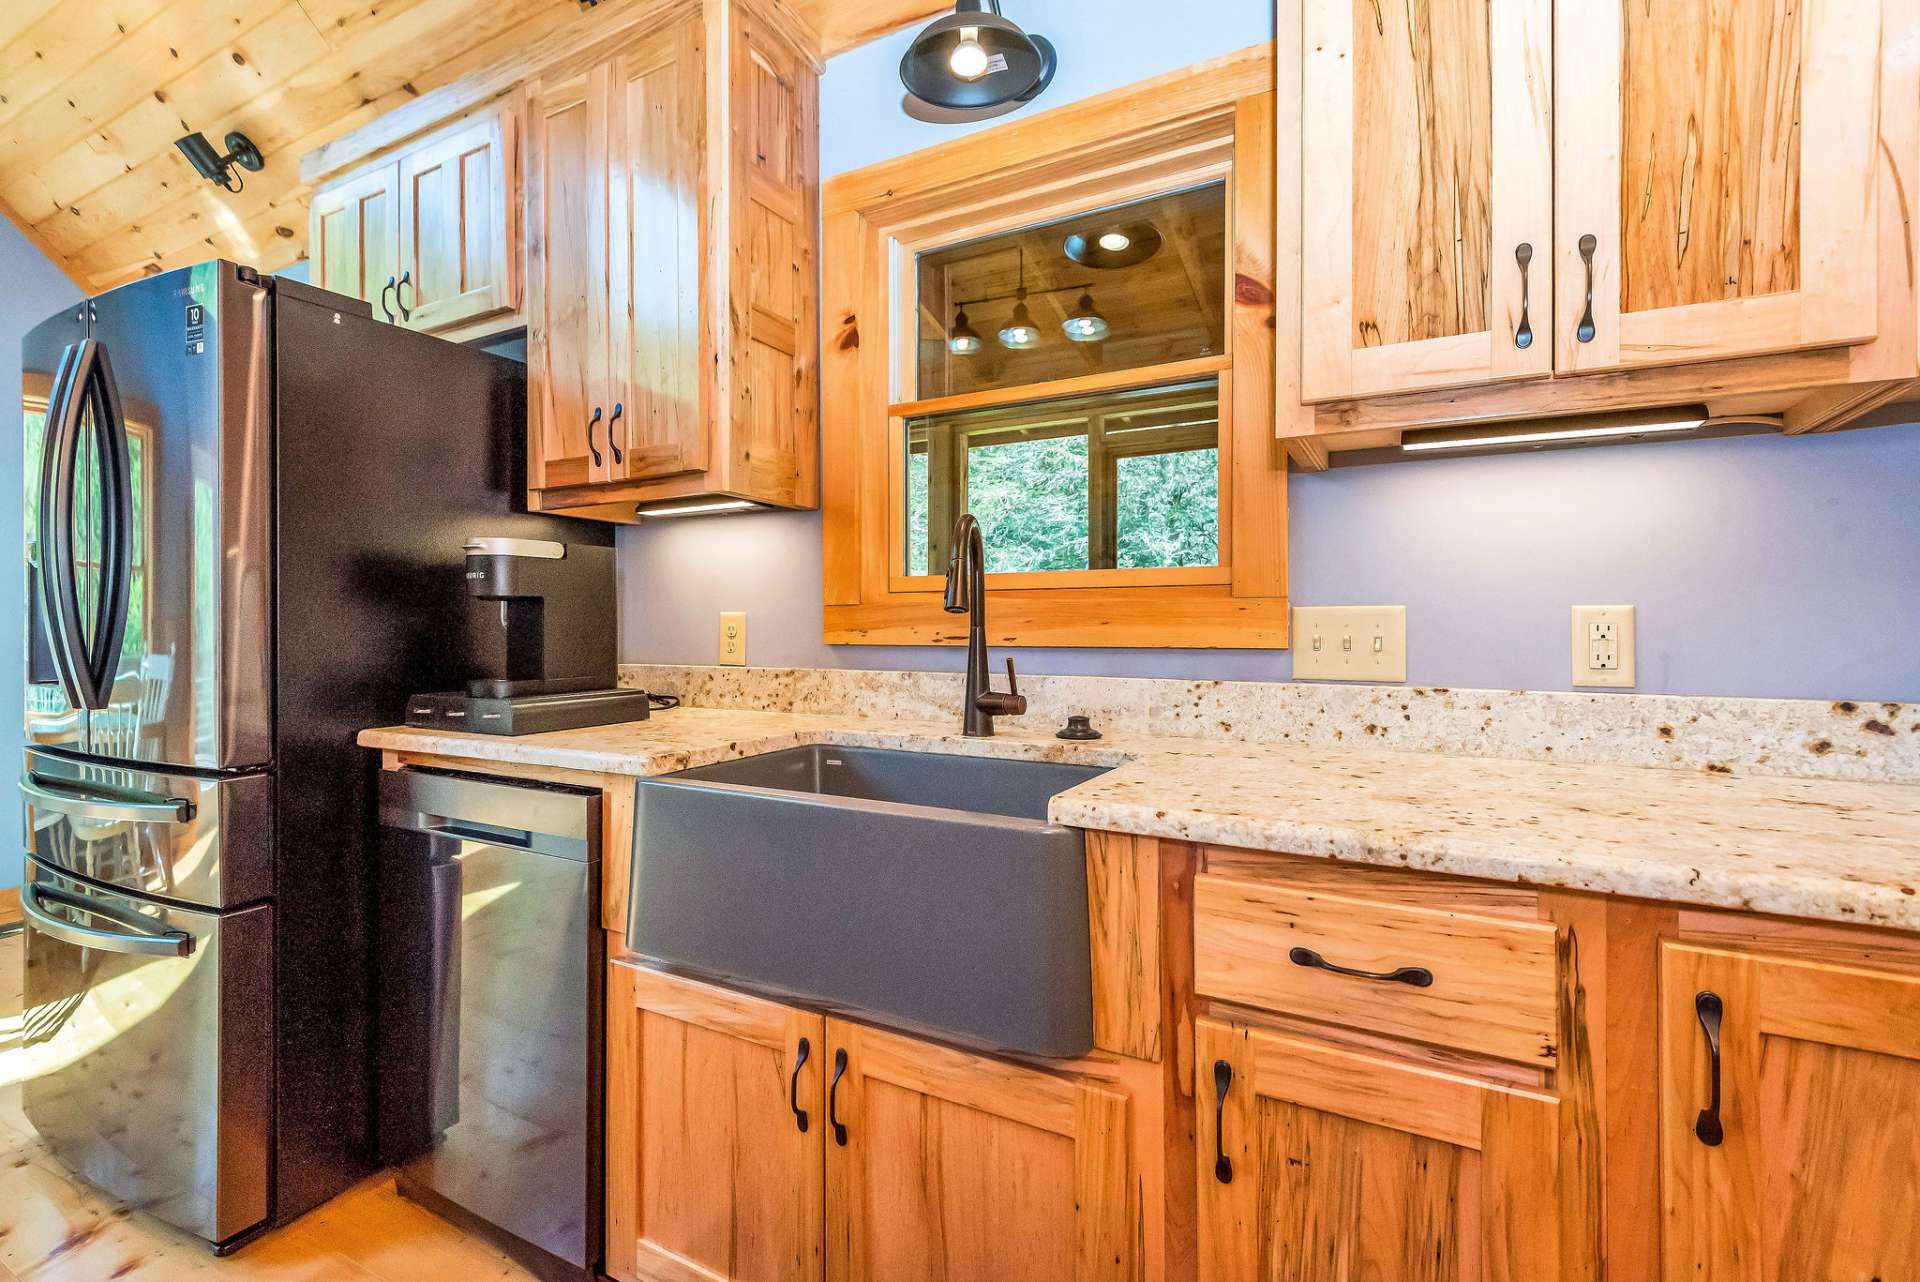 The inclusion of a farm sink and blue stainless appliances adds a unique touch to the kitchen, showcasing the well-thought-out design and attention to detail present throughout the cabin.